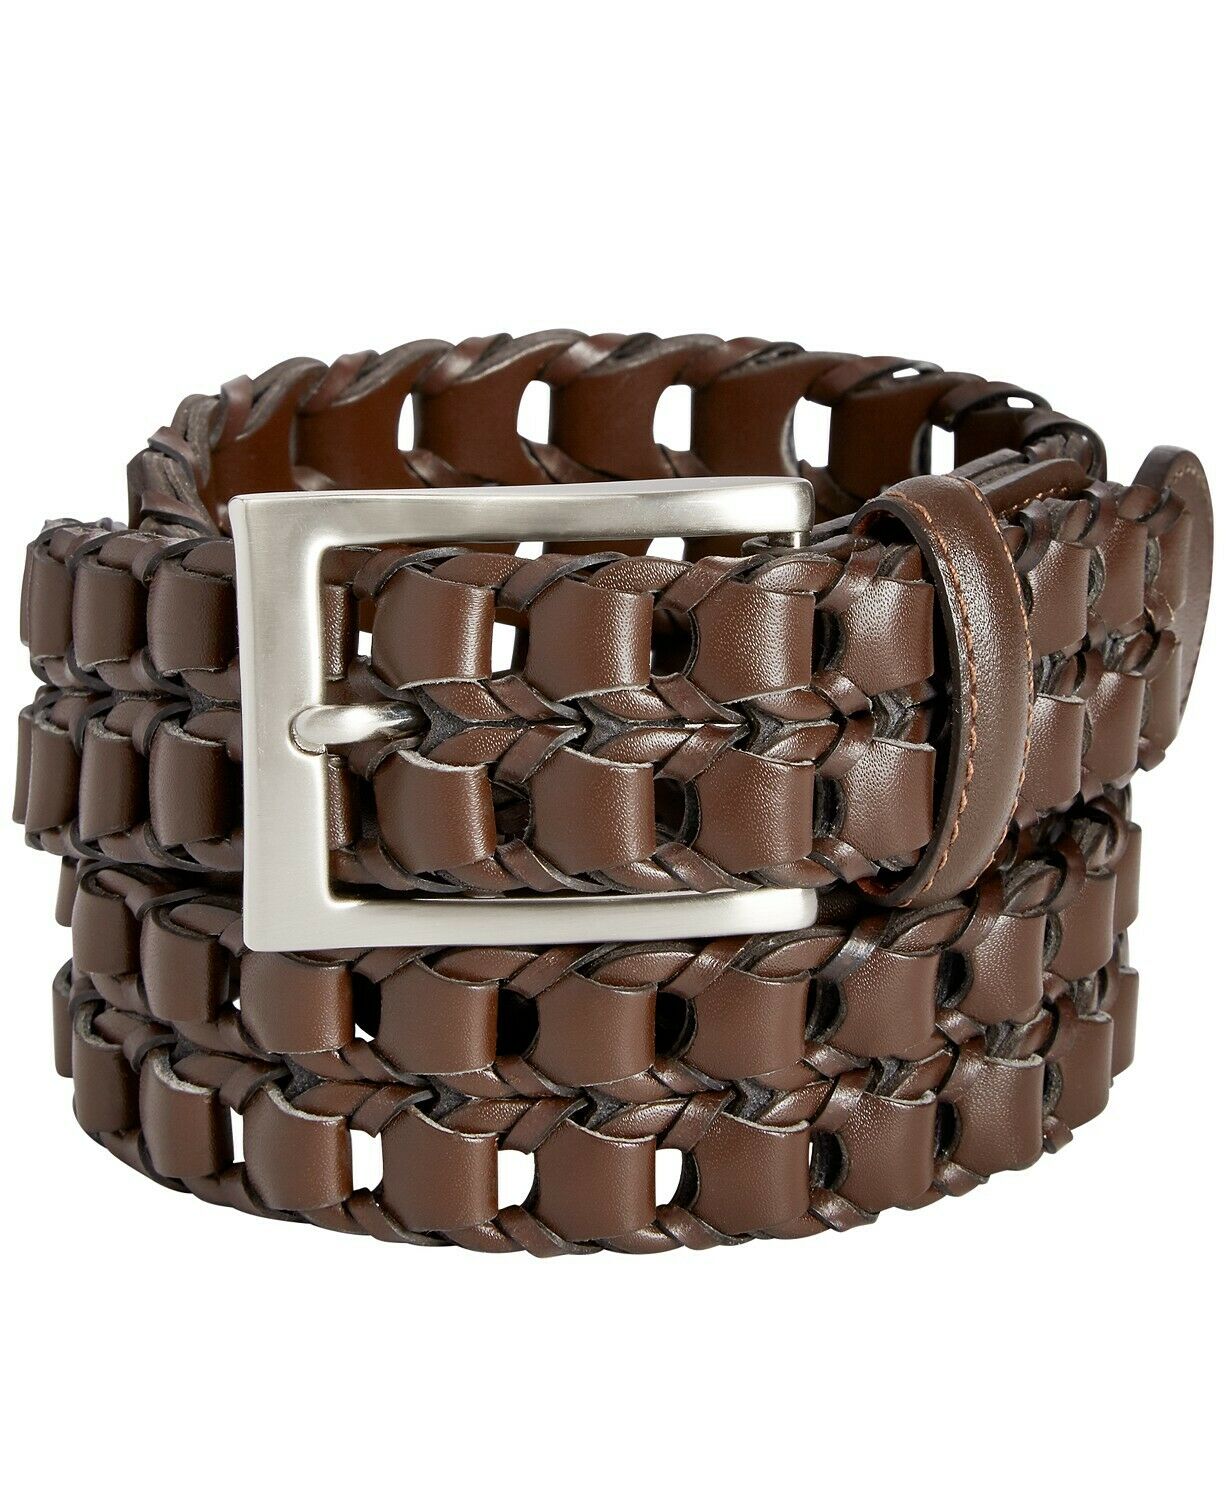 Perry Ellis Men's Leather Buckle Braided Belt Brown Size Small - image 2 of 2